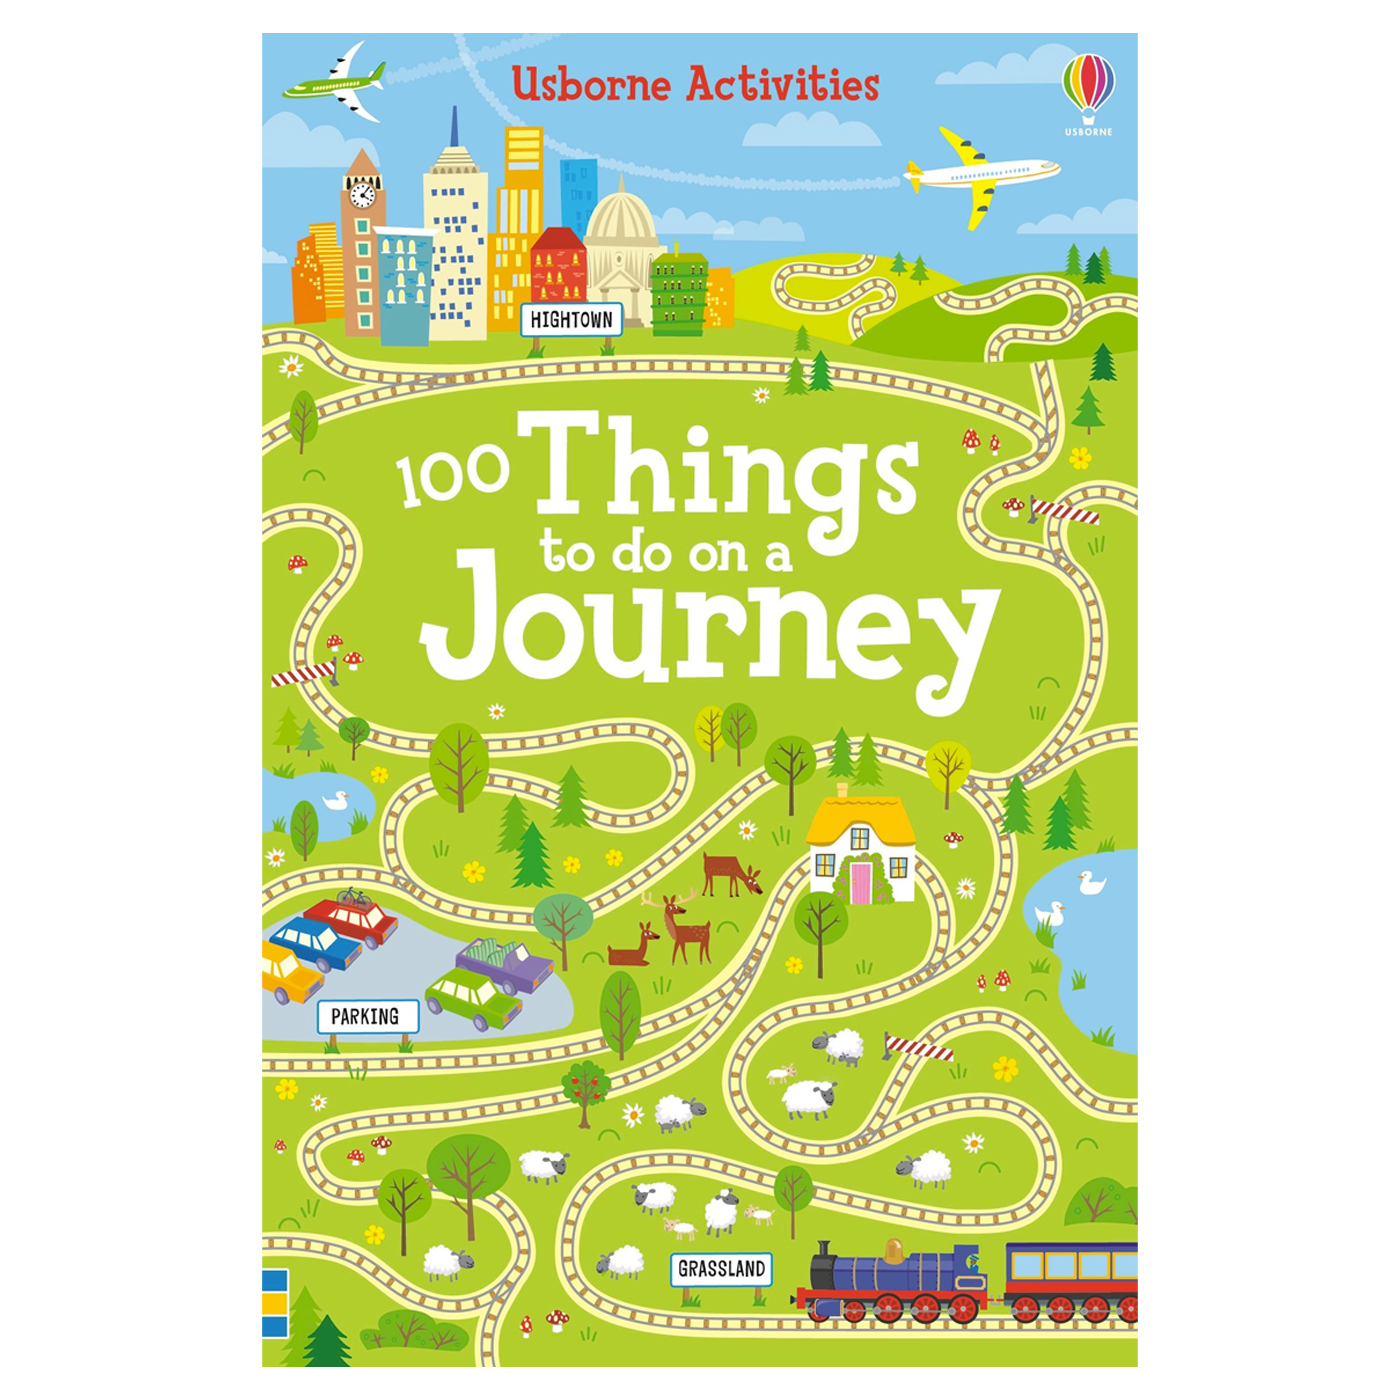  100 Things to do on a Journey